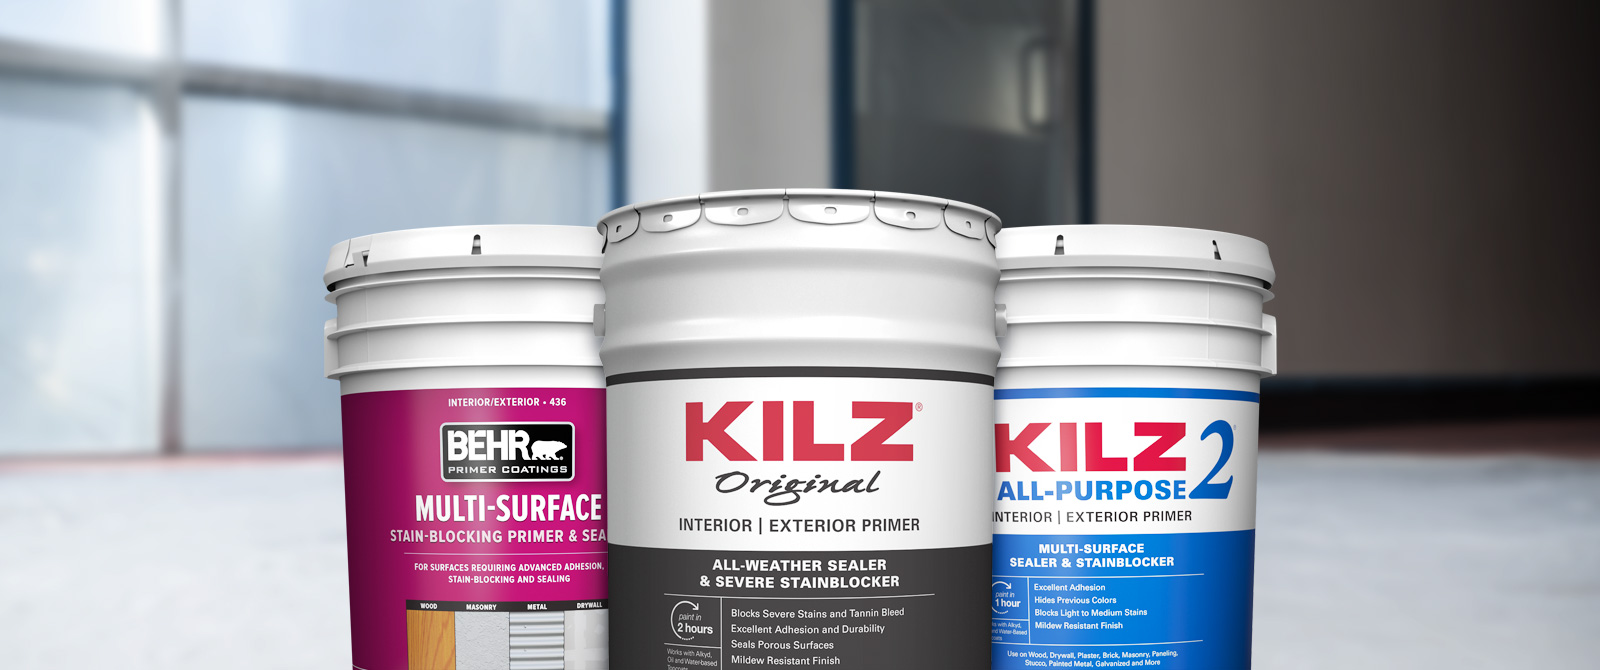 Behr Pro exterior primer products landing page desktop image featuring 5 gallon cans.